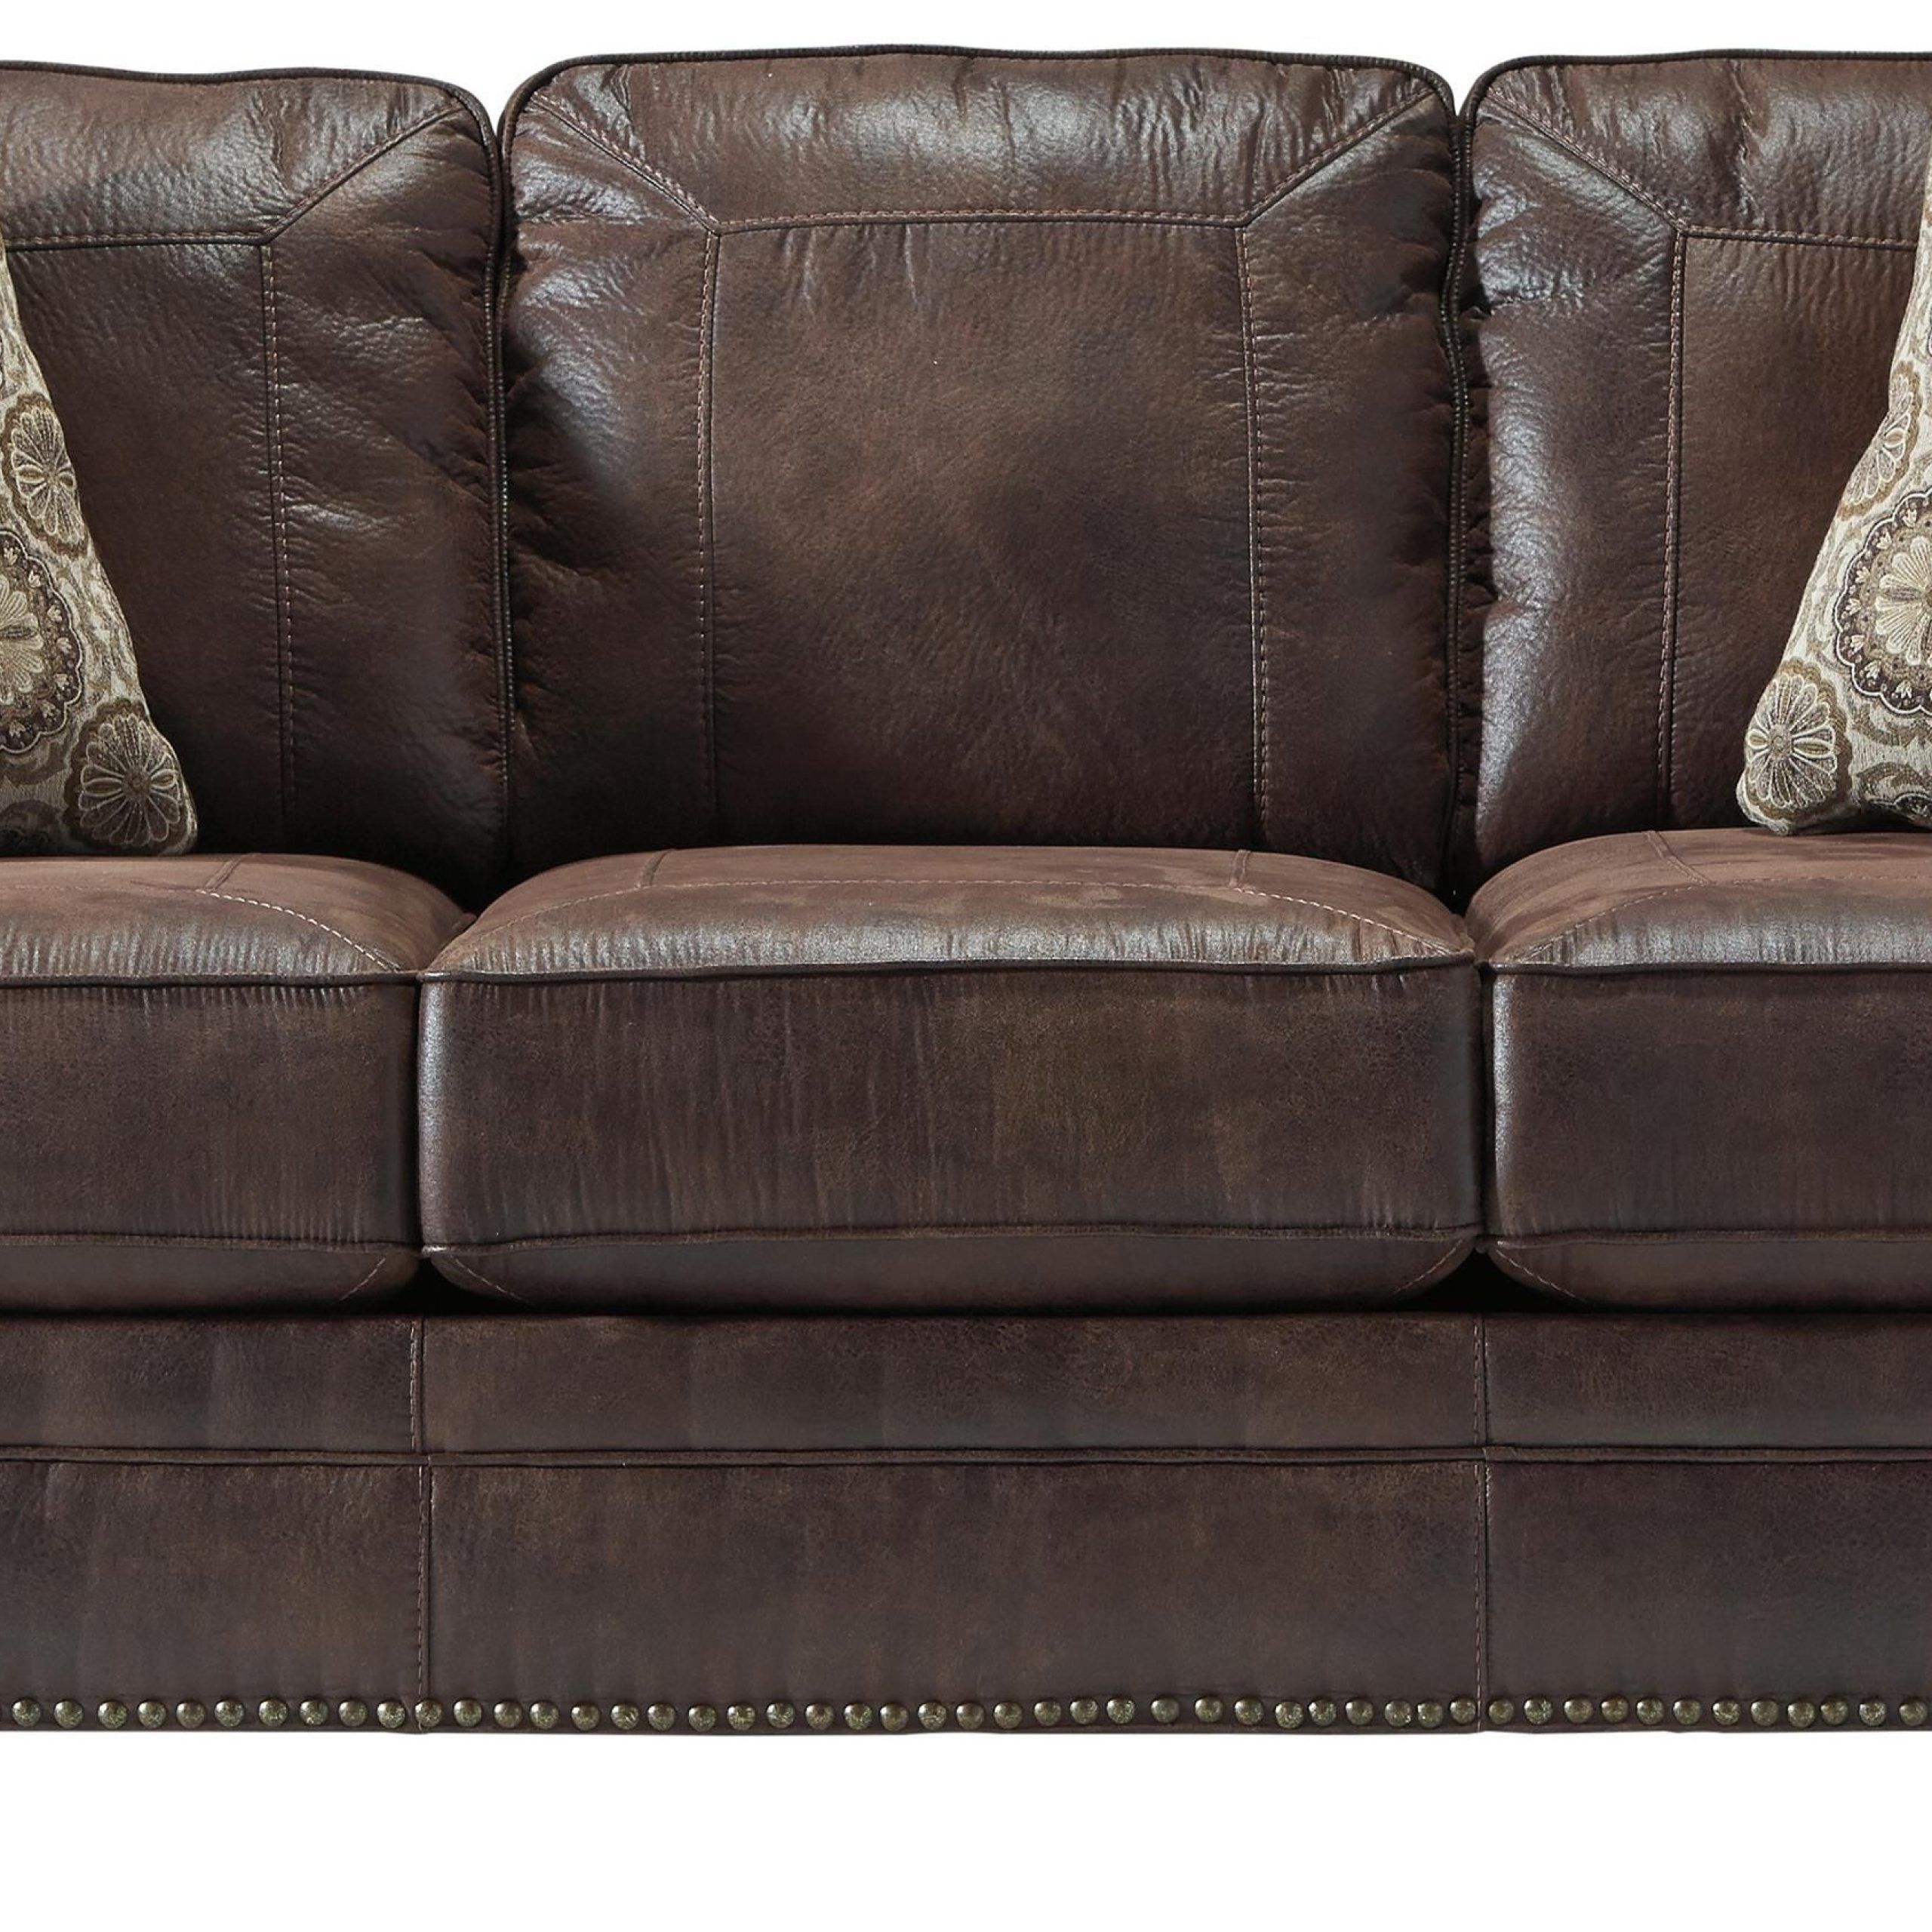 Breville Faux Leather Sofa With Rolled Arms And Nailhead Trimashley In Faux Leather Sofas In Chocolate Brown (View 18 of 20)